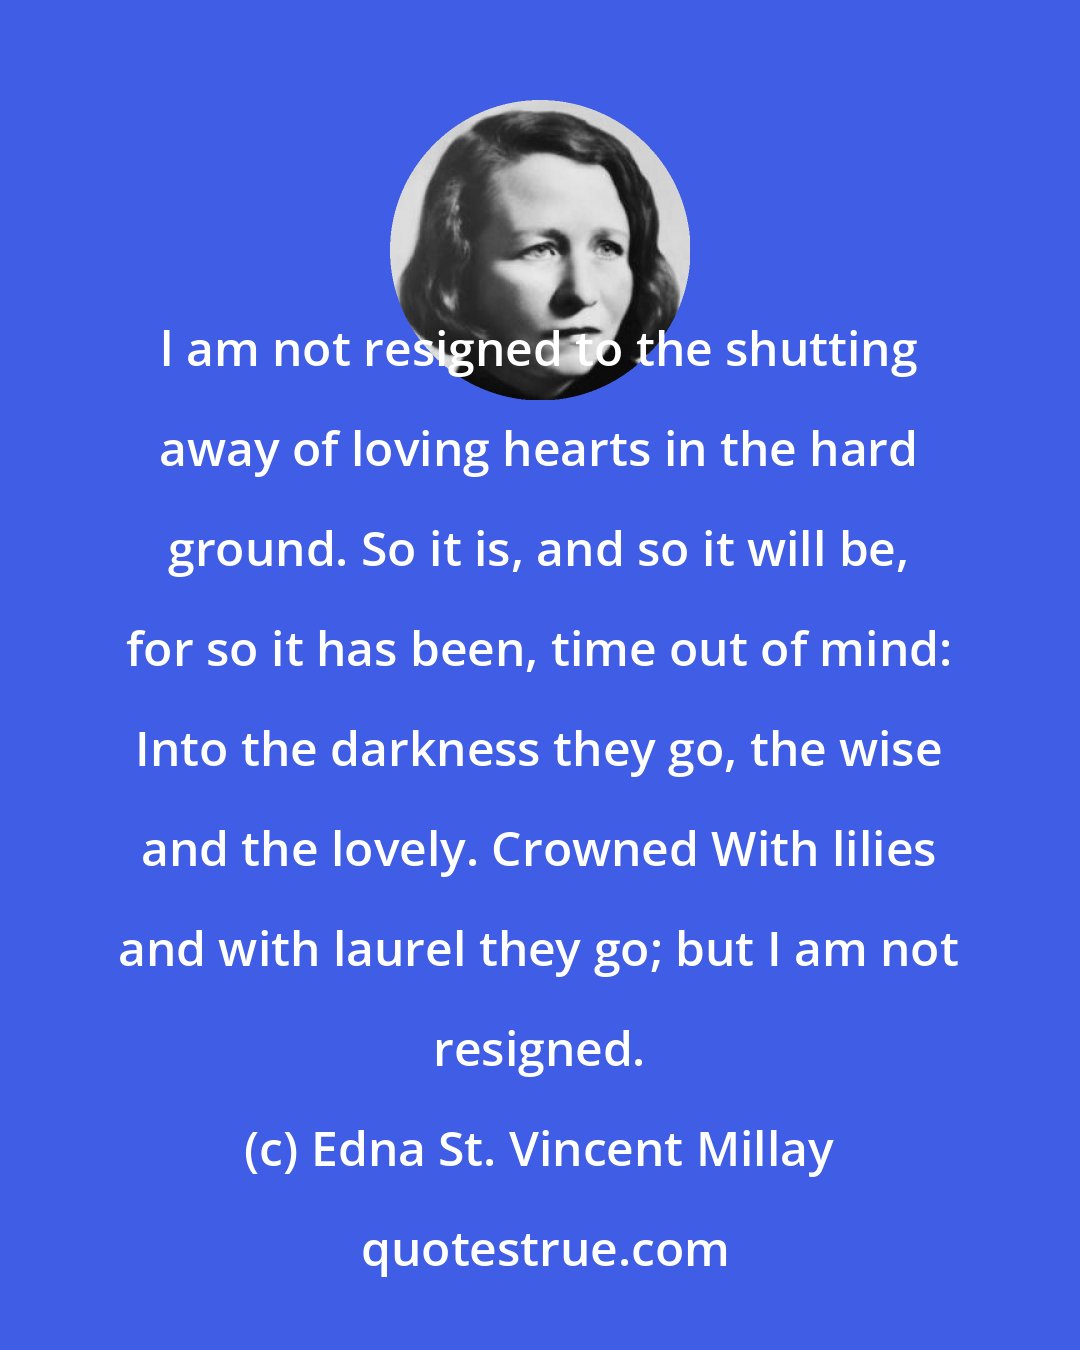 Edna St. Vincent Millay: l am not resigned to the shutting away of loving hearts in the hard ground. So it is, and so it will be, for so it has been, time out of mind: Into the darkness they go, the wise and the lovely. Crowned With lilies and with laurel they go; but I am not resigned.